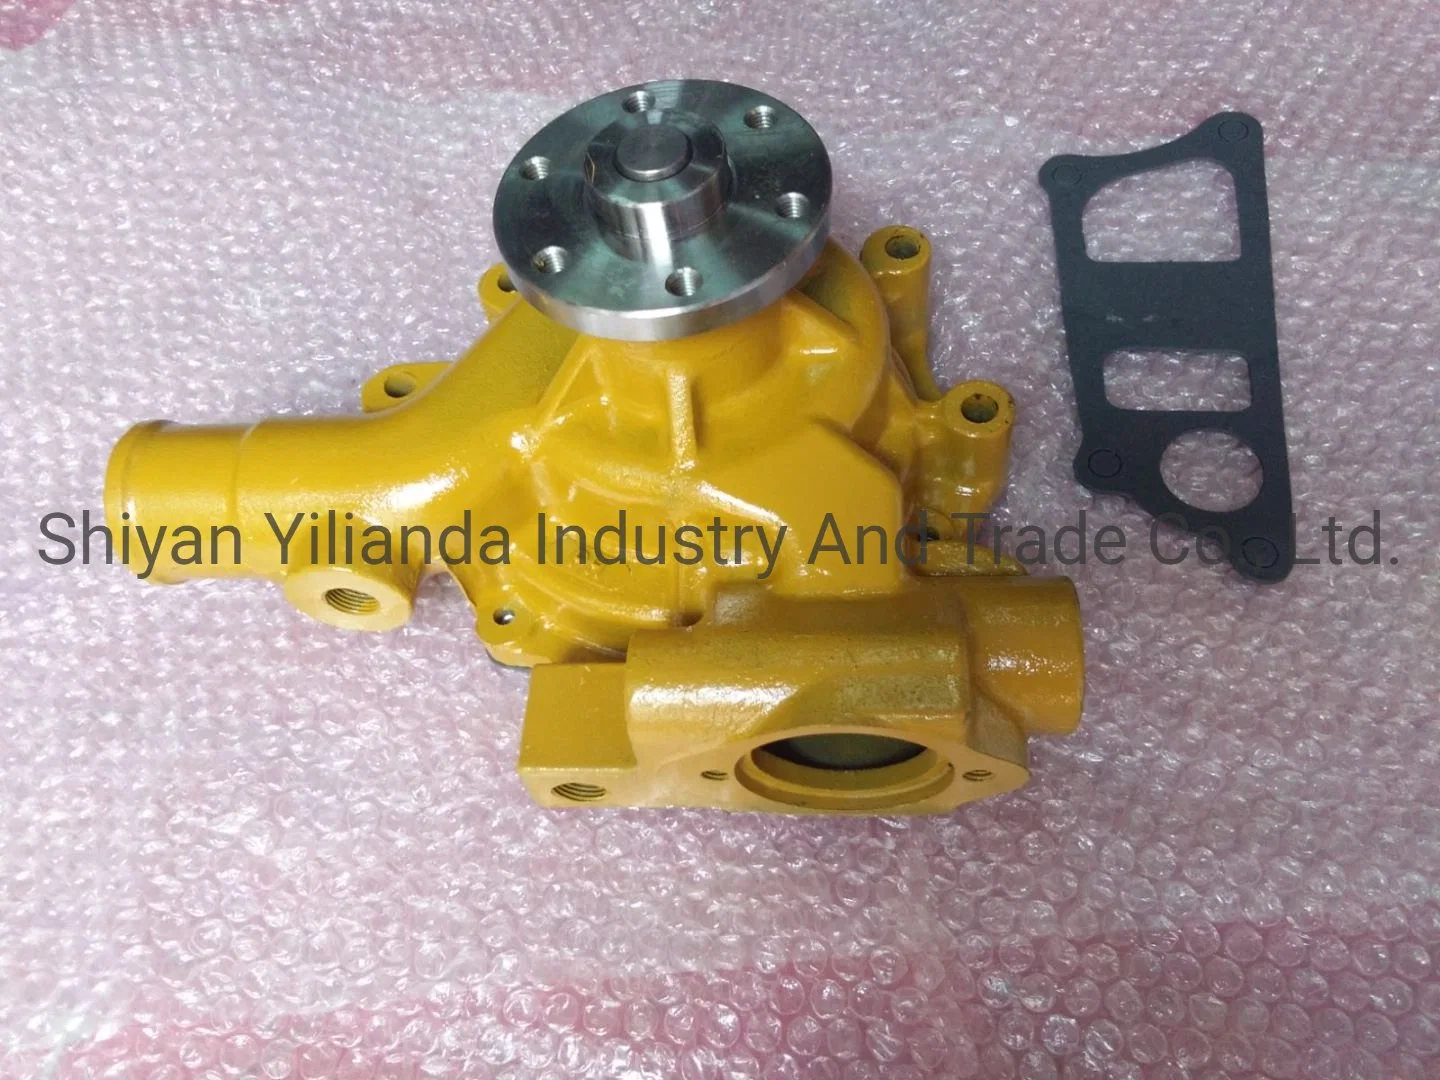 6206-61-1505 Construction Machinery Excavator Forklift Diesel Engine Parts for 69d95L 6D95 Water Pump Assy